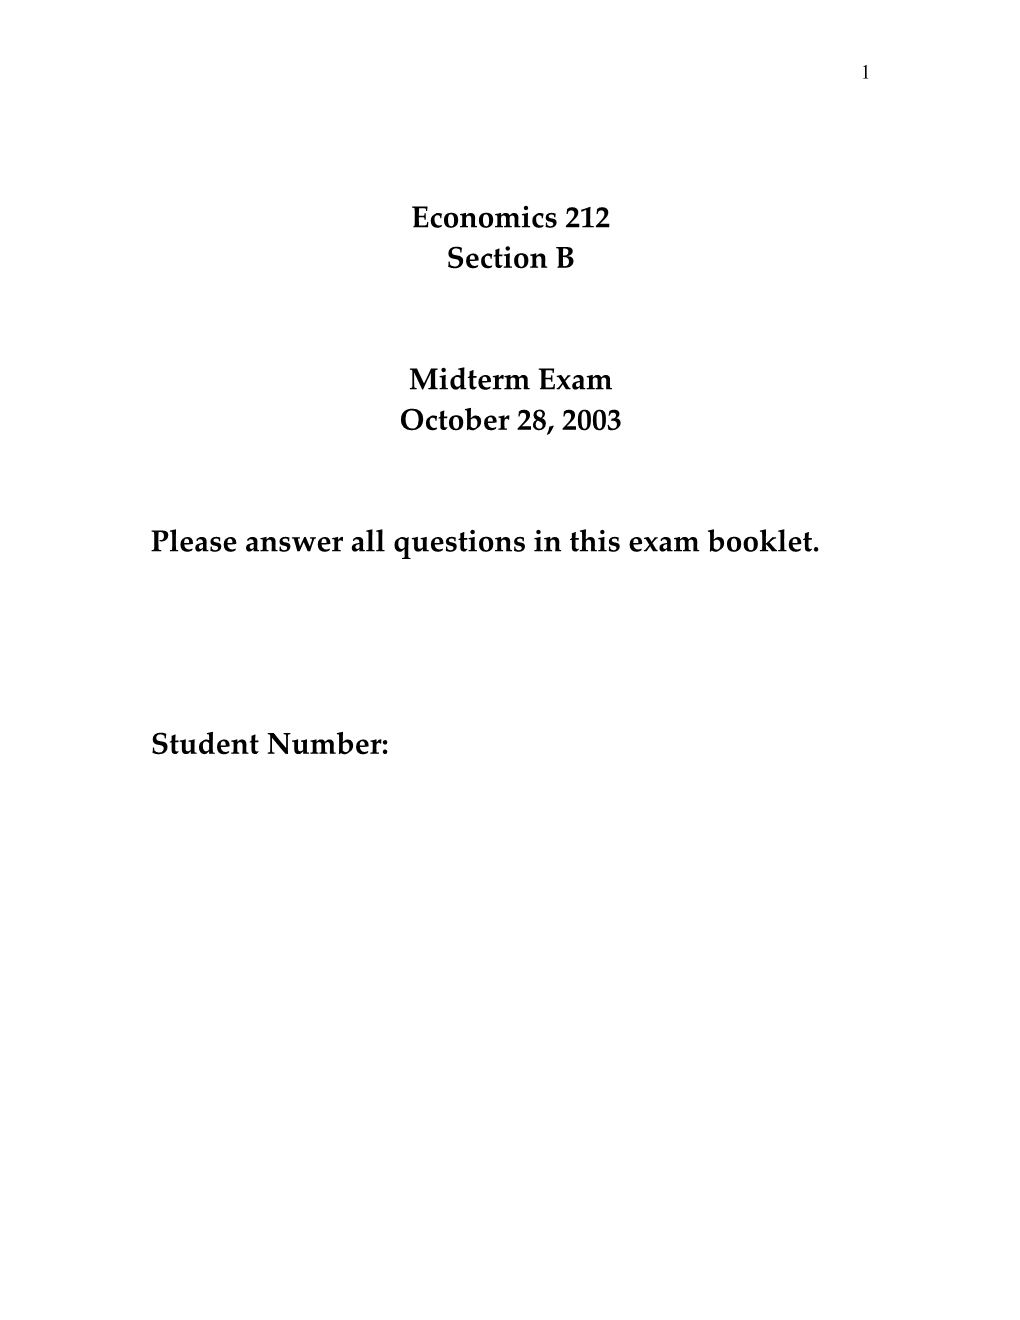 Please Answer All Questions in This Exam Booklet